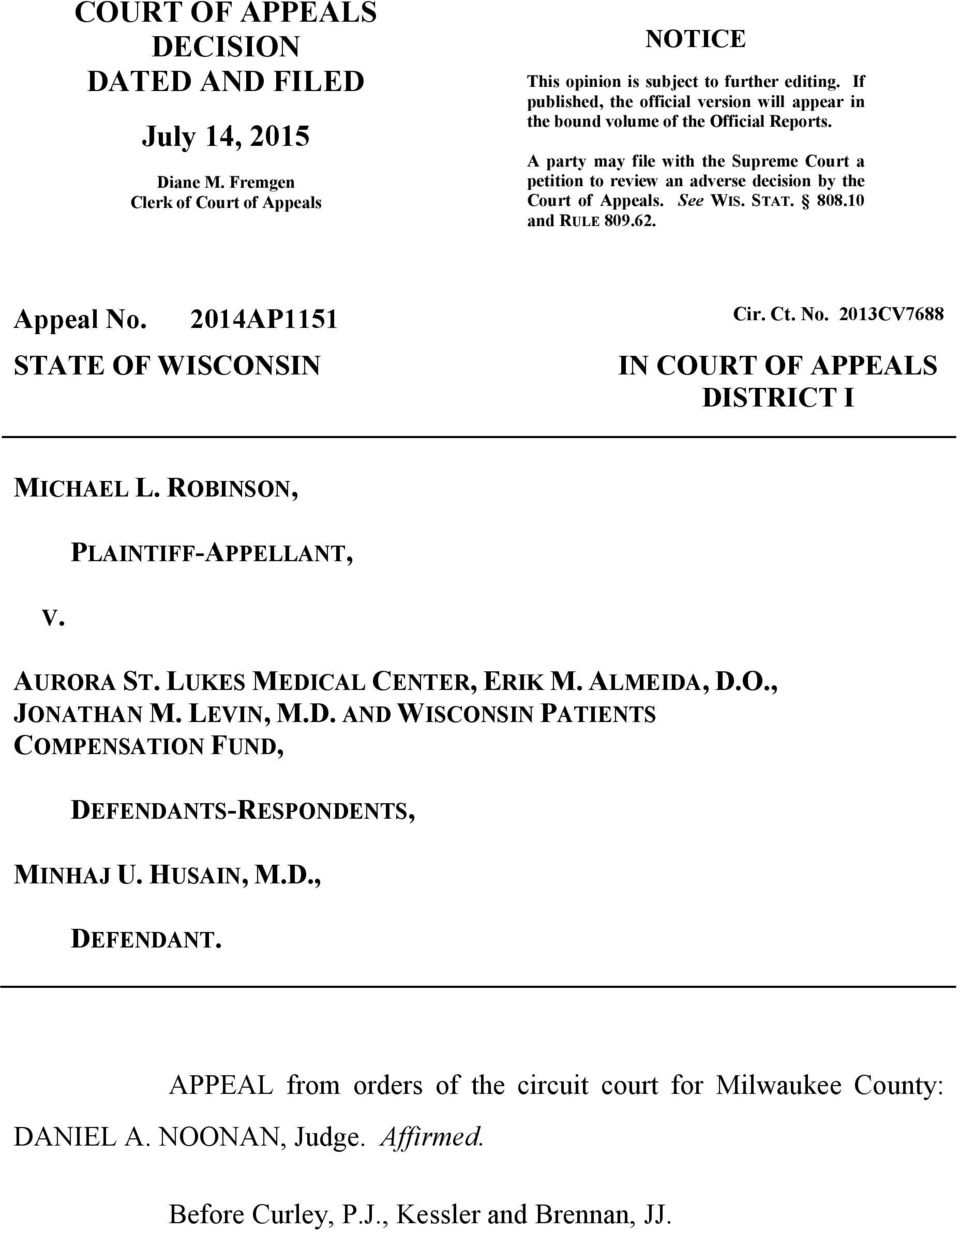 See WIS. STAT. 808.10 and RULE 809.62. Appeal No. 2014AP1151 STATE OF WISCONSIN Cir. Ct. No. 2013CV7688 IN COURT OF APPEALS DISTRICT I MICHAEL L. ROBINSON, V. PLAINTIFF-APPELLANT, AURORA ST.